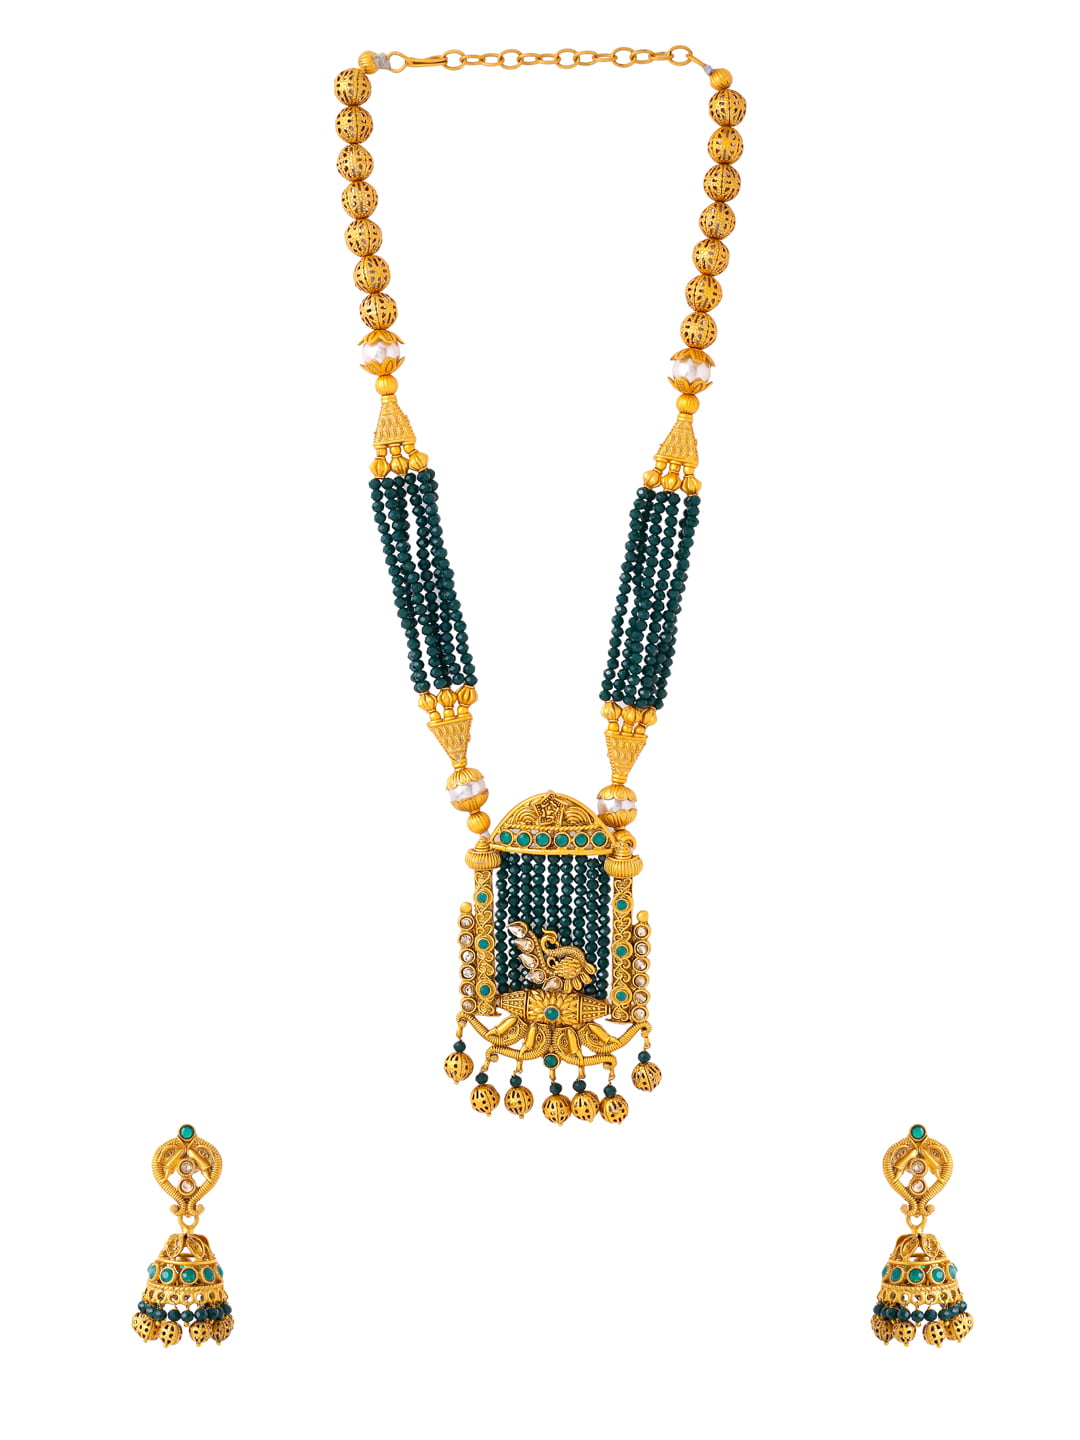 Gold Plated Peacock Shape Necklace Set with Pearls-Viraasi